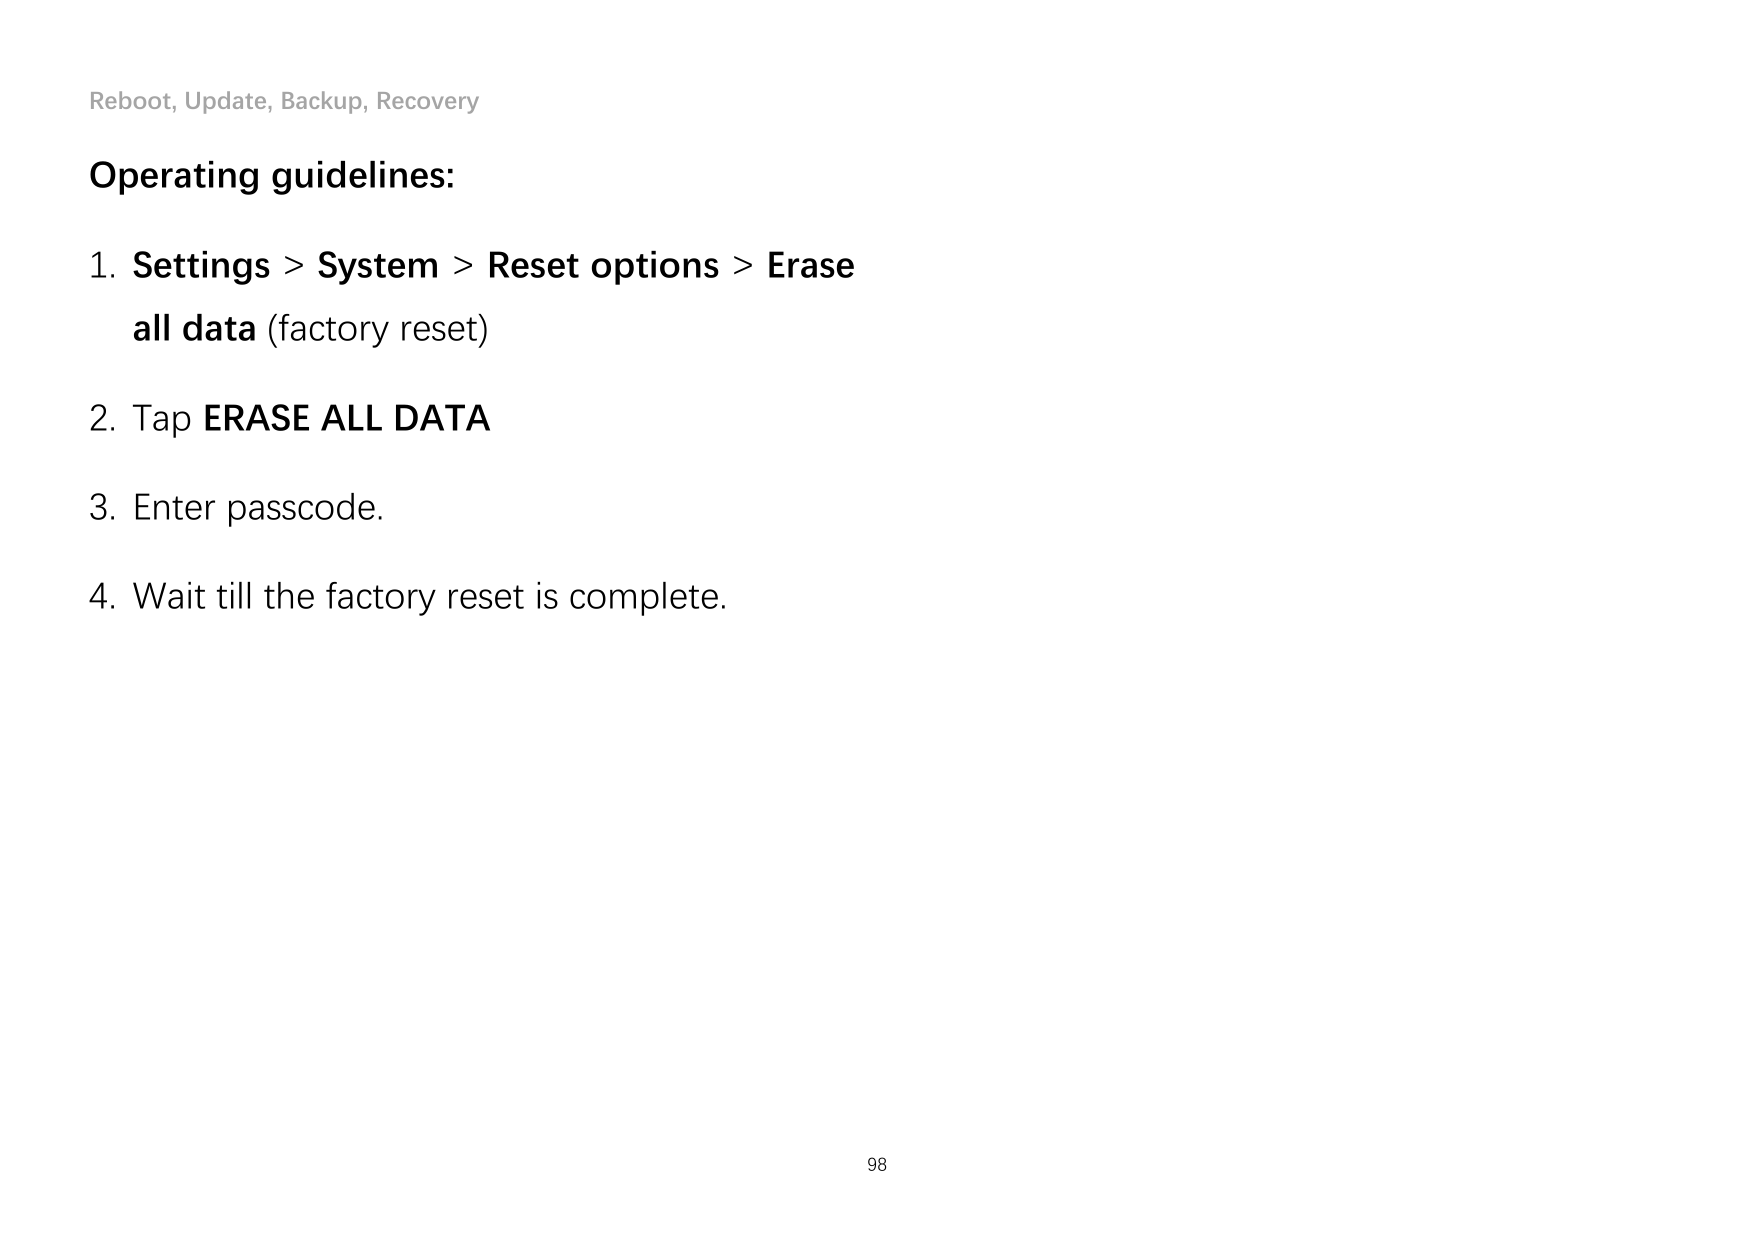 Reboot, Update, Backup, RecoveryOperating guidelines:1. Settings > System > Reset options > Eraseall data (factory reset)2. Tap 